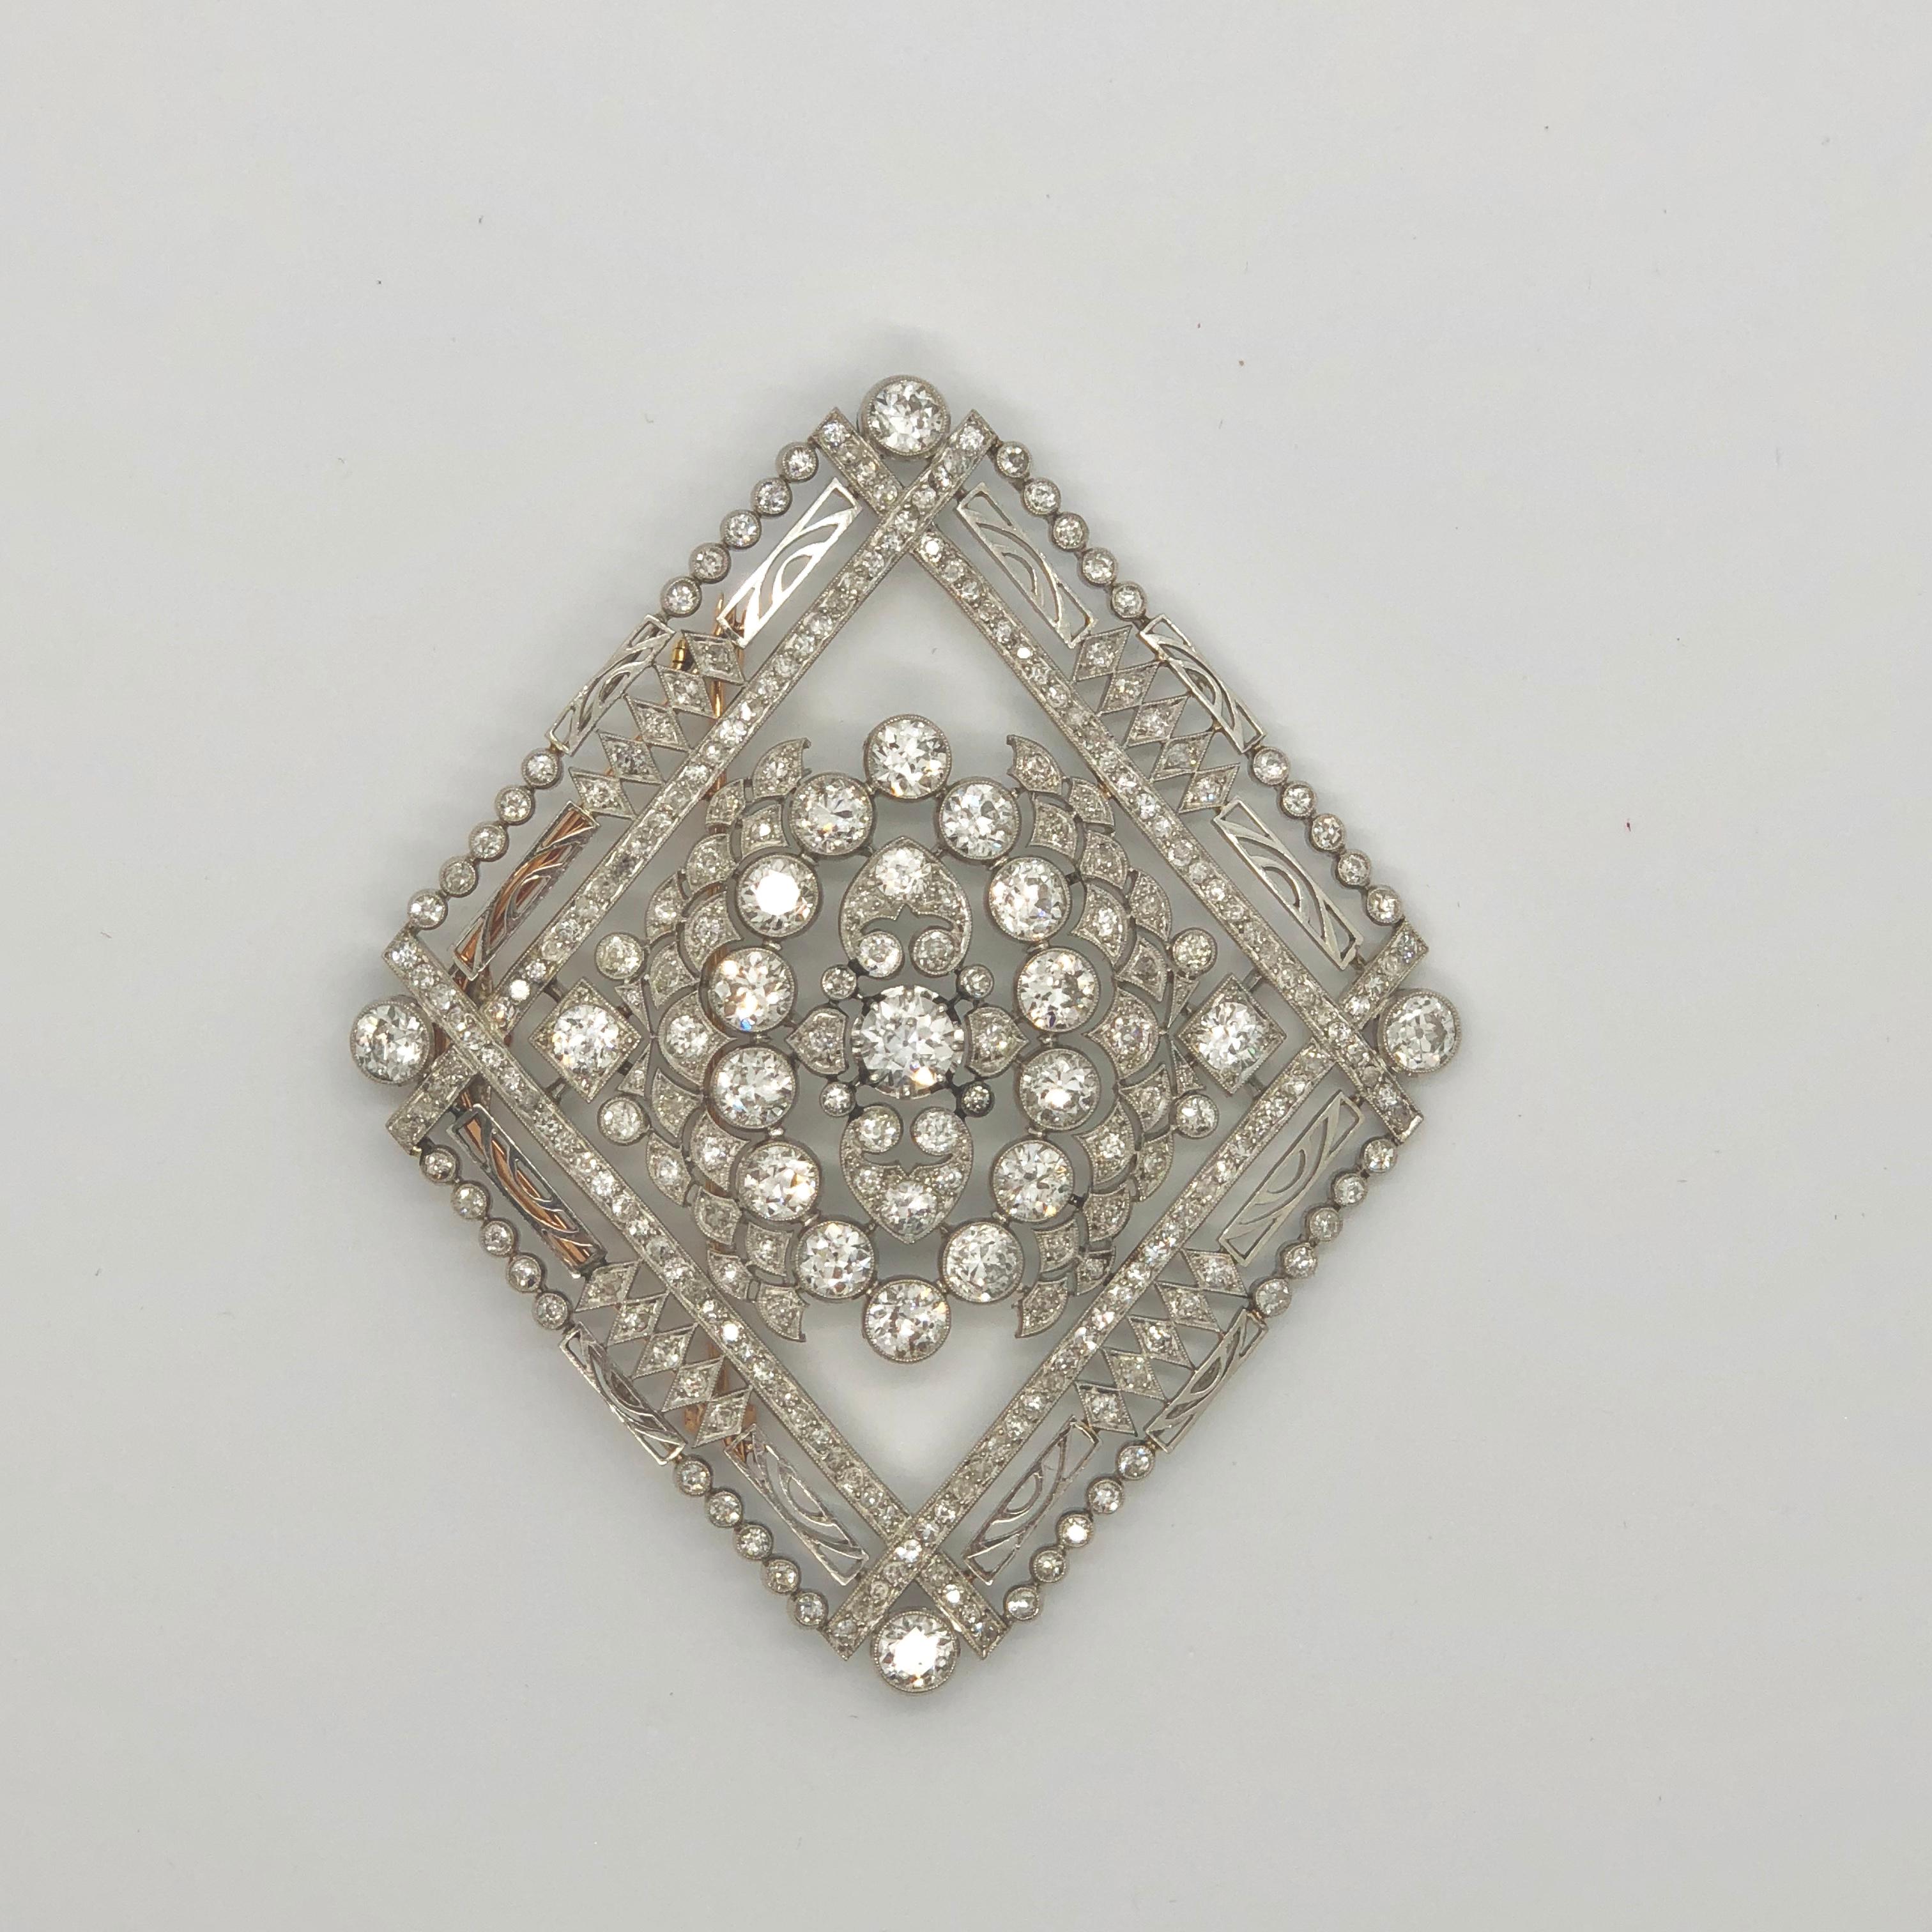 A big Edwardian diamond brooch in platinum, 1920s. The diamonds weigh circa 17 carats in total, including 21 bigger brilliant diamond solitaires. It is a magnificent piece with a lovely symmetry. It can be worn as a brooch or pendant - with French